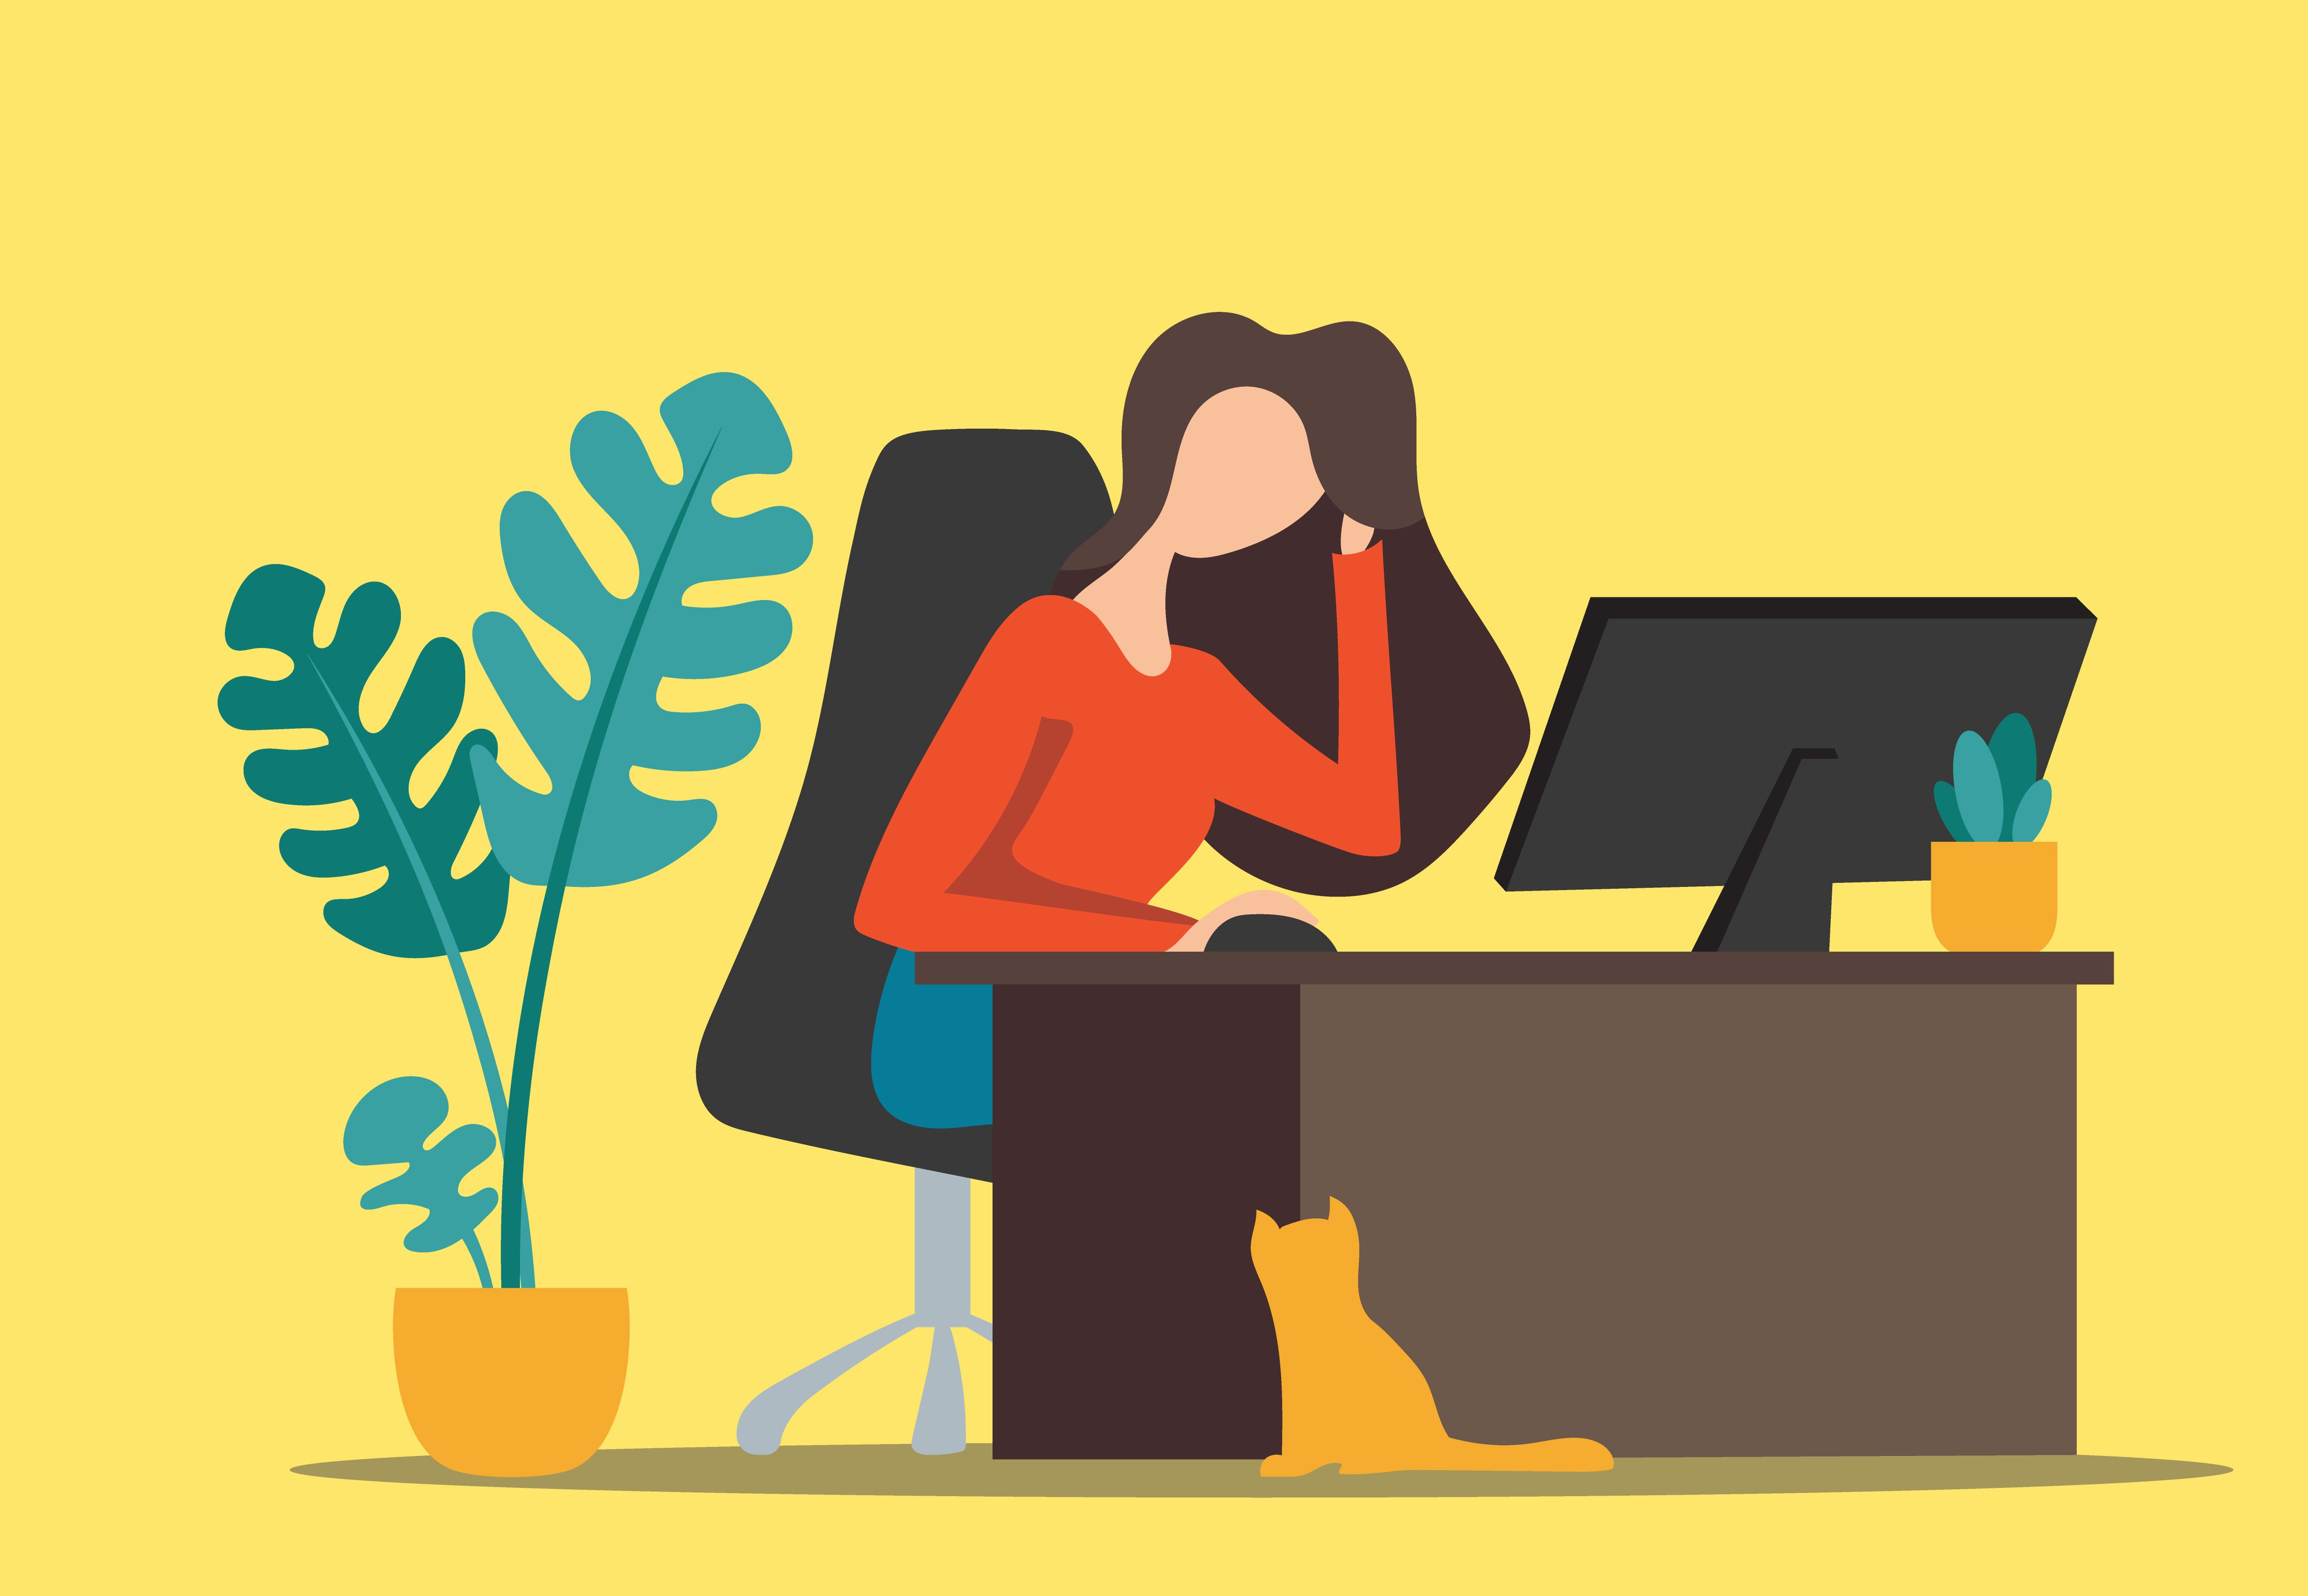 8 Tips for Making Remote Work Less Lonely